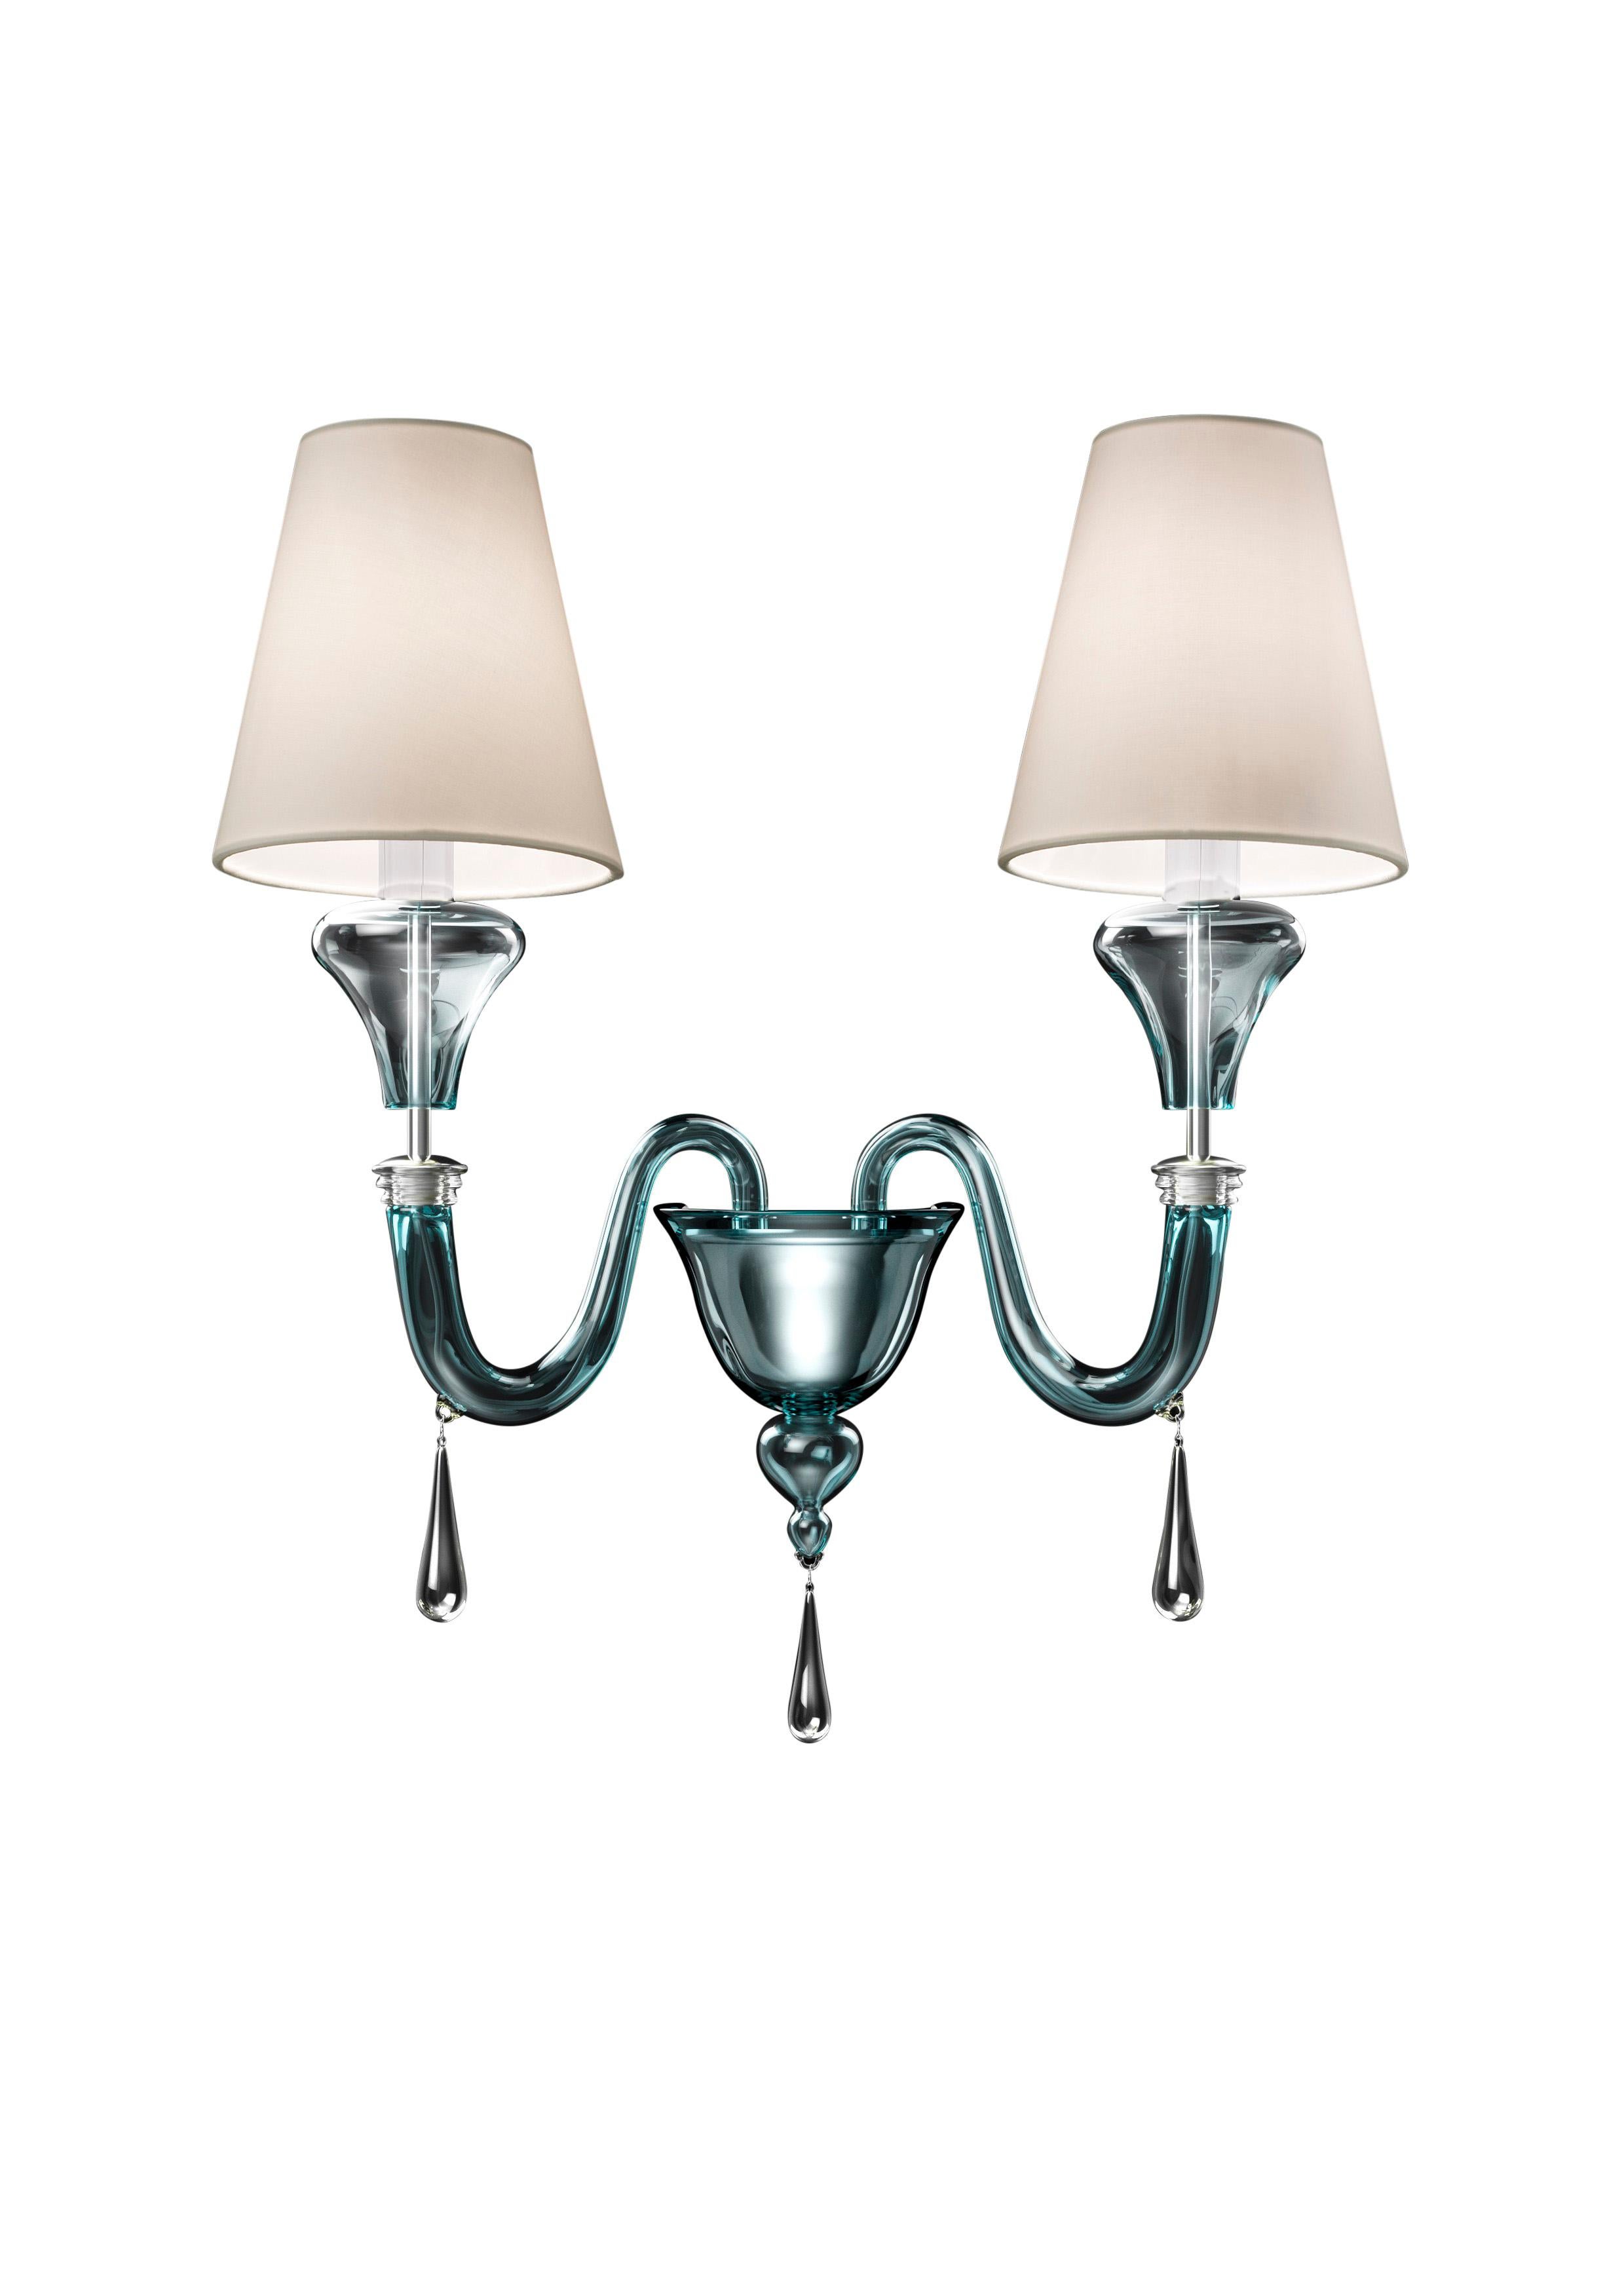 Blue (Aquamarine_AQ) Maryland 5587 02 Chandelier in Glass with White Shade, by Barovier & Toso